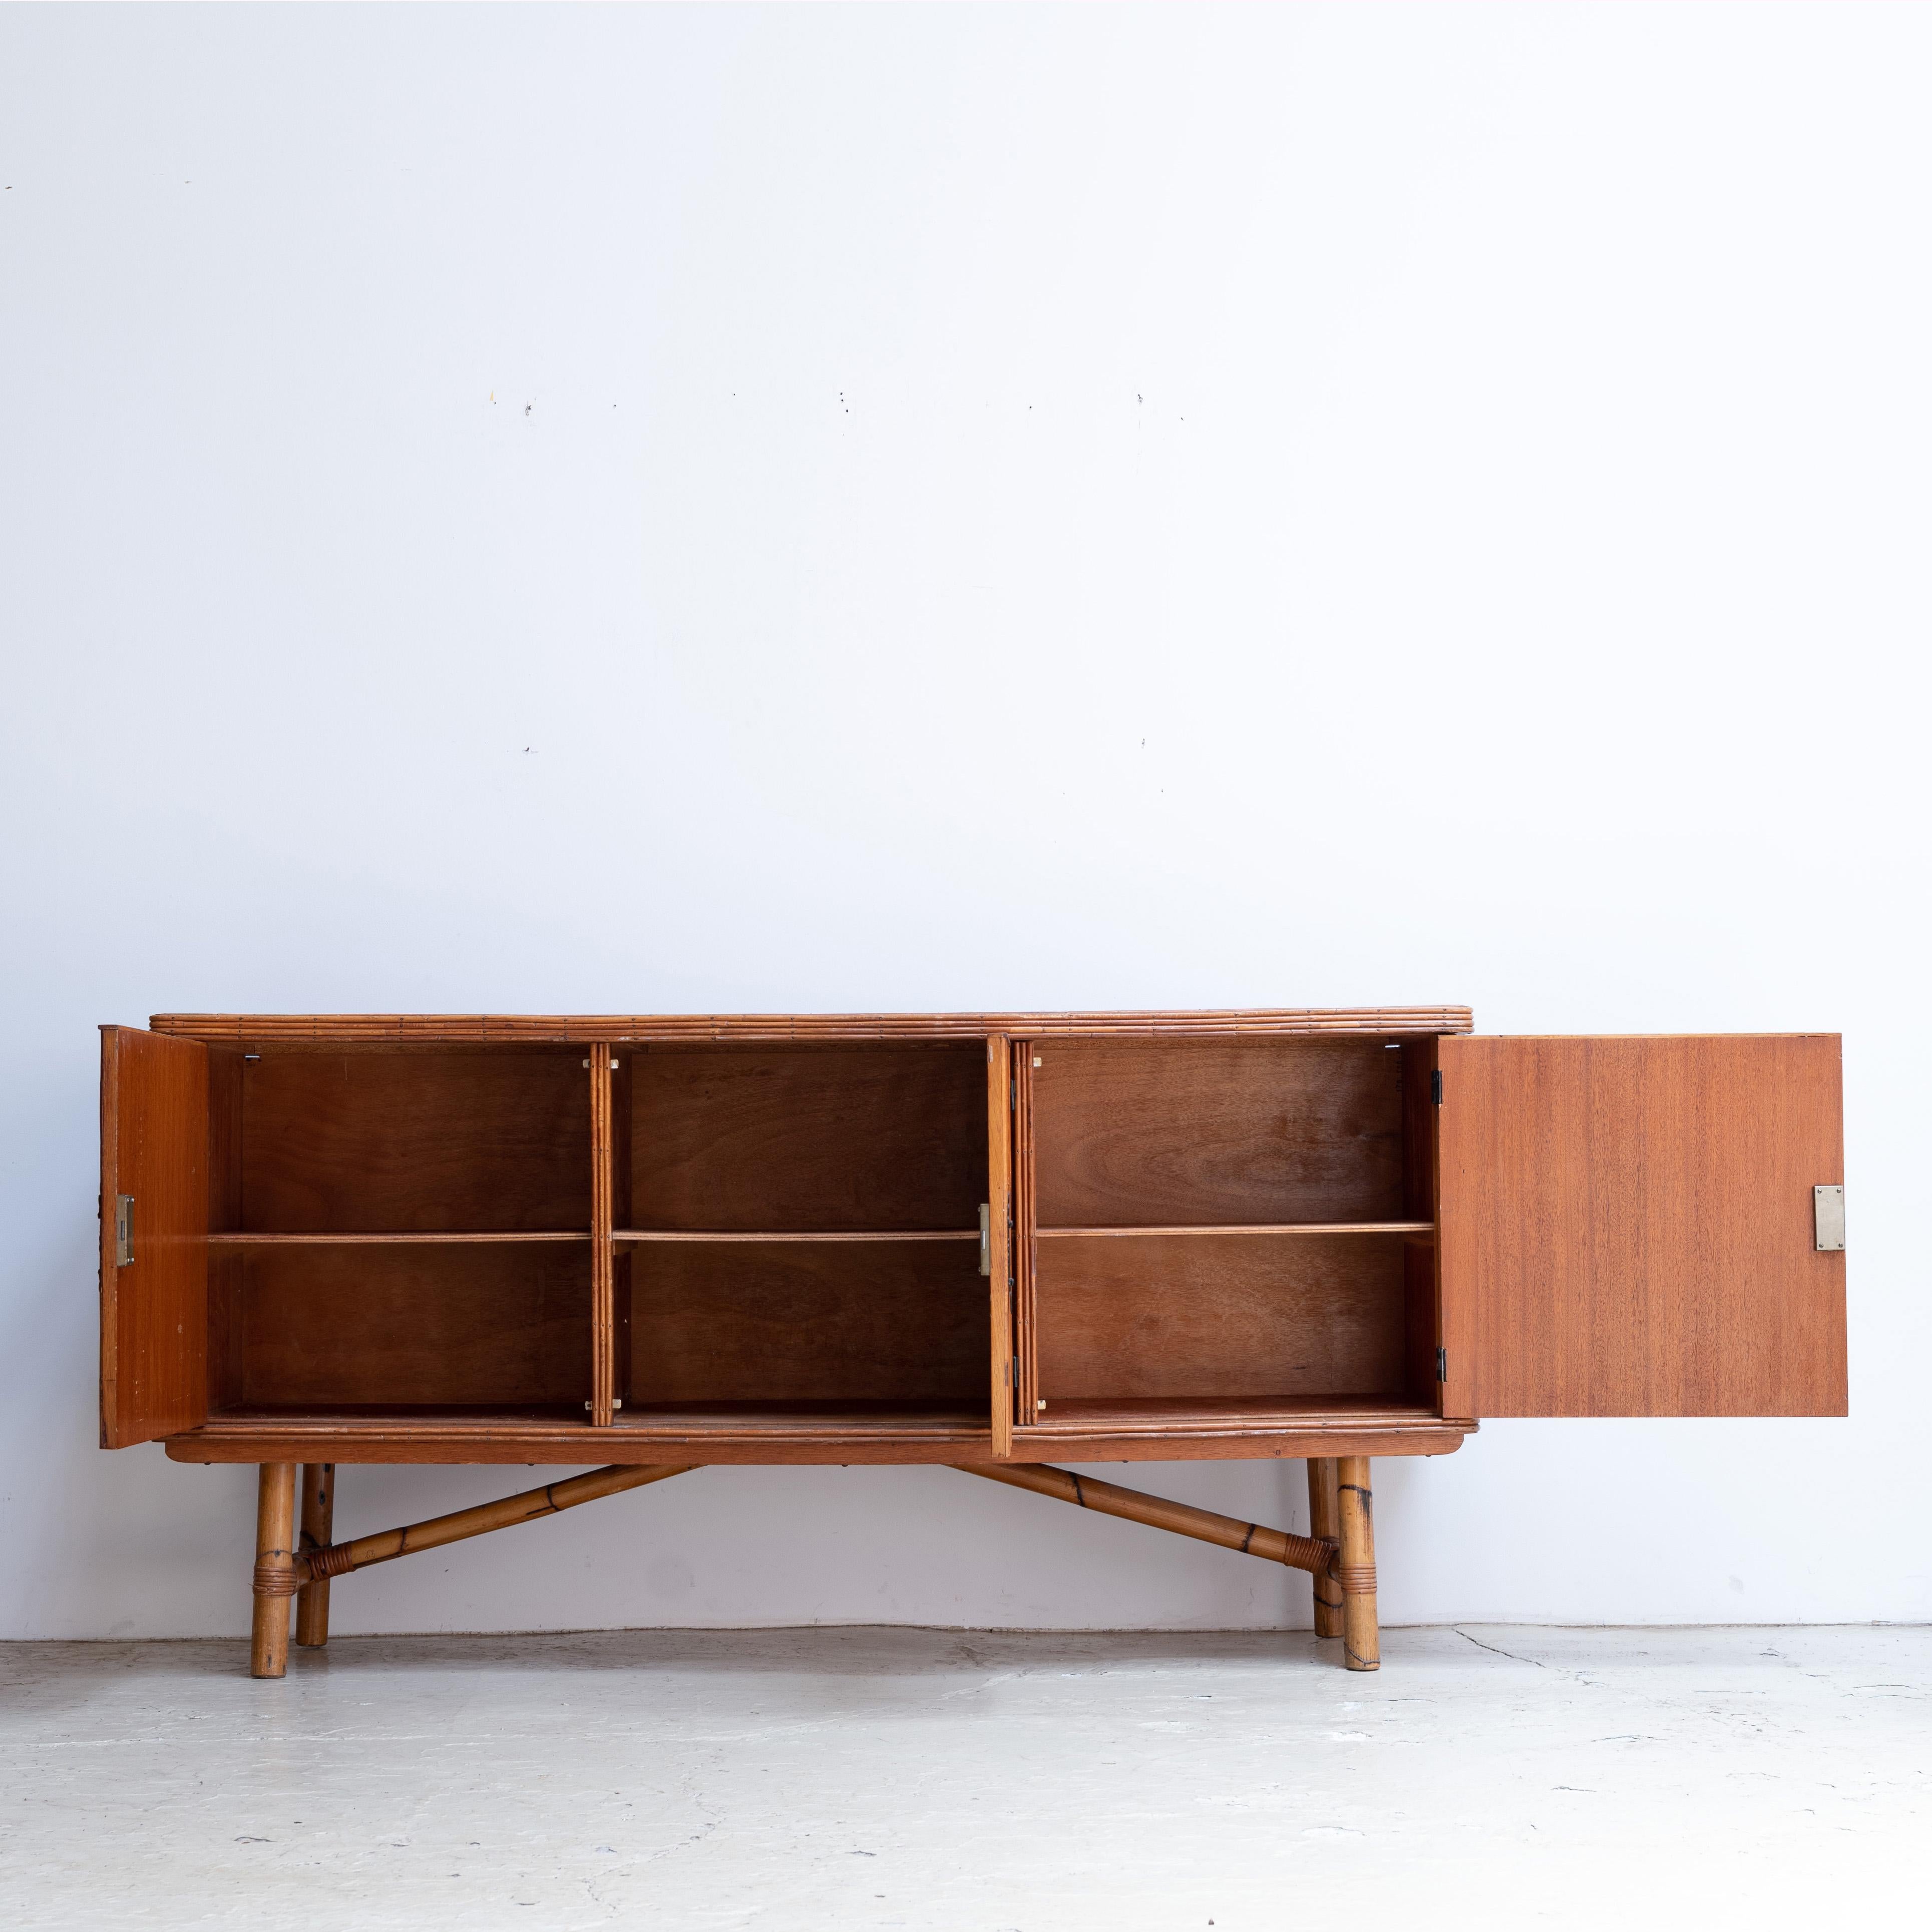 Adrien Audoux & Frida Minet French Bamboo Sideboard, C. 1960s In Good Condition For Sale In Edogawa-ku Tokyo, JP